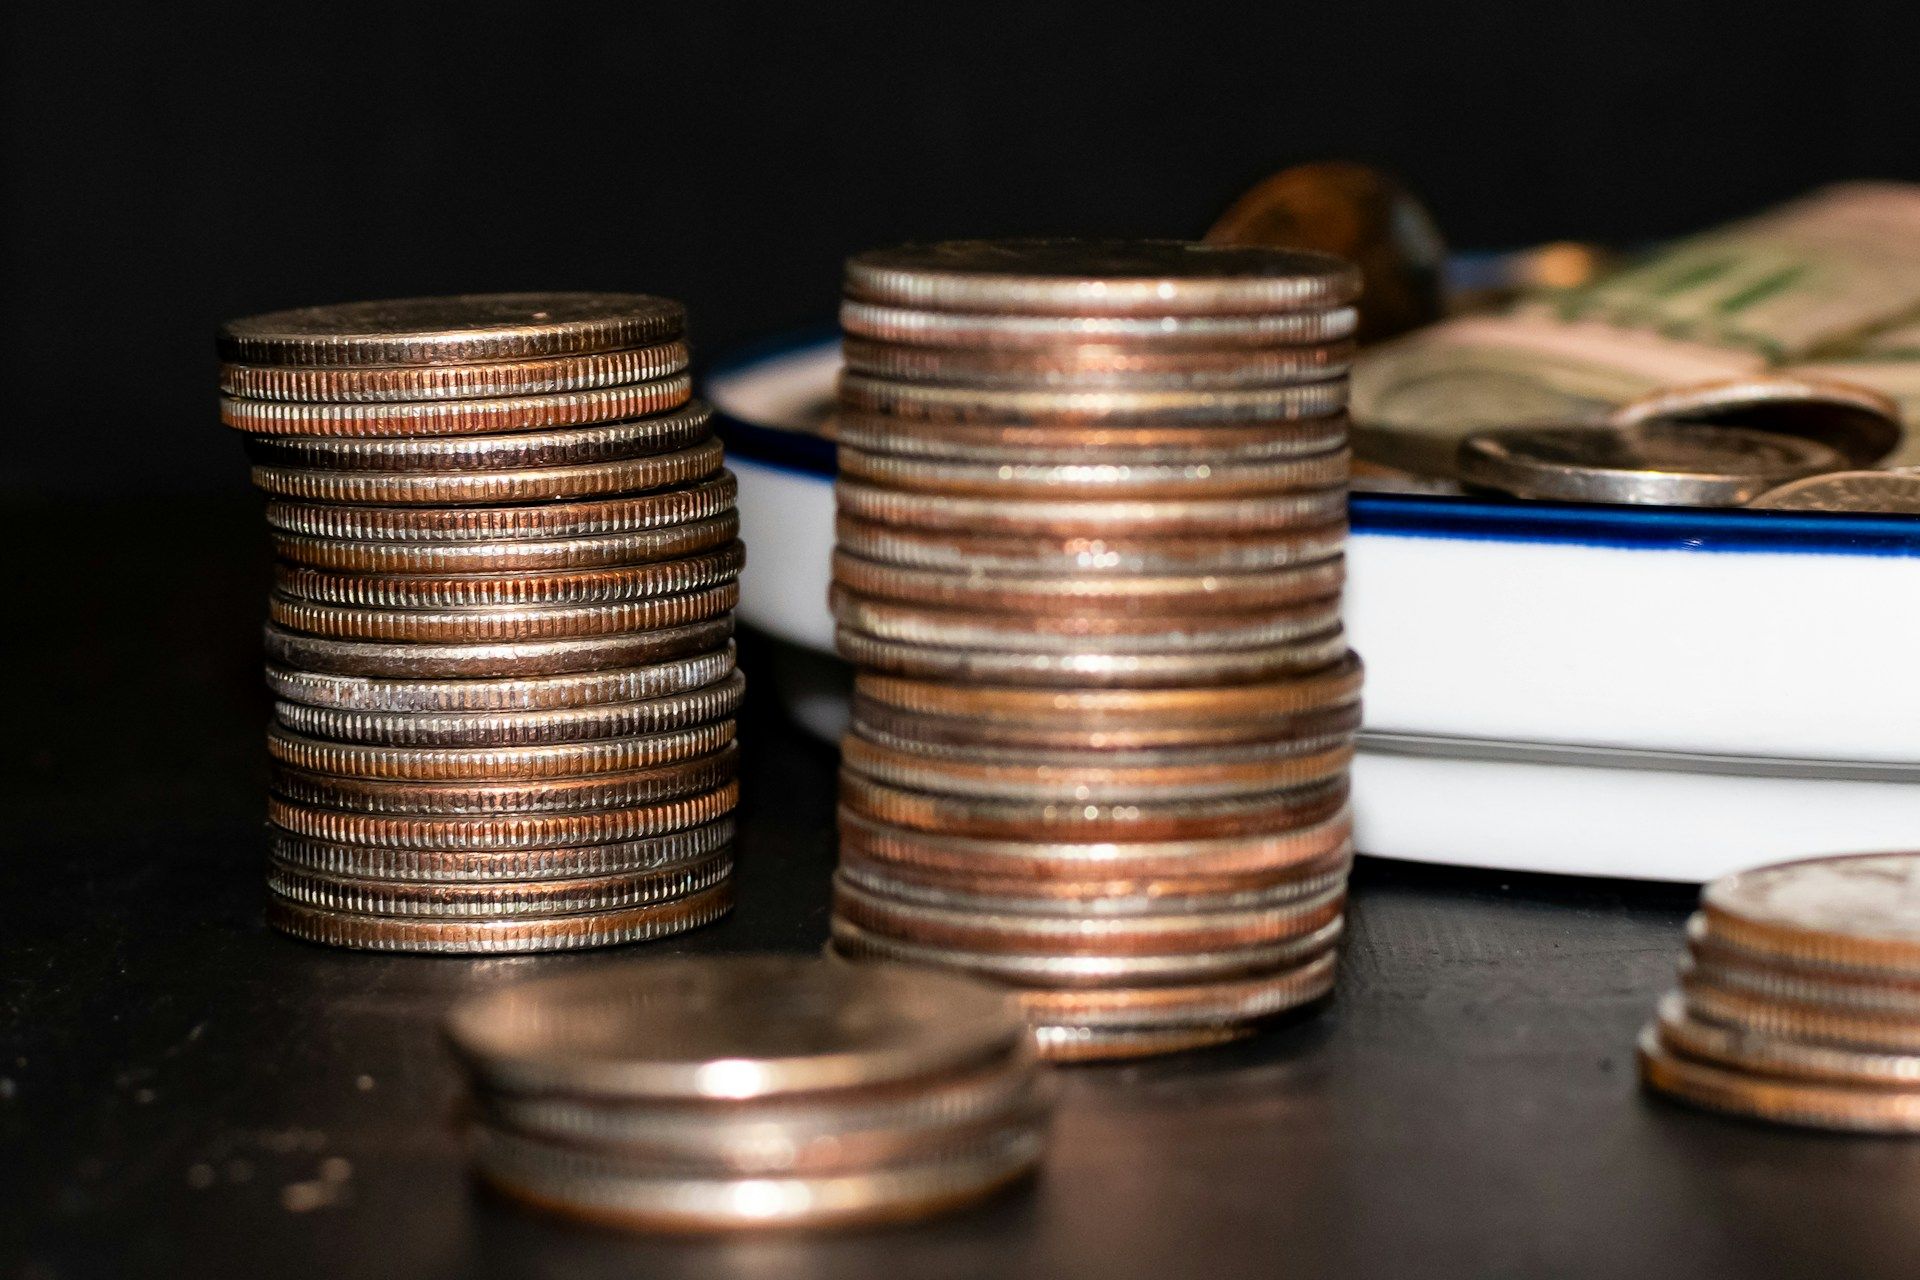 Two stacks of quarters in front of a blue and white plate